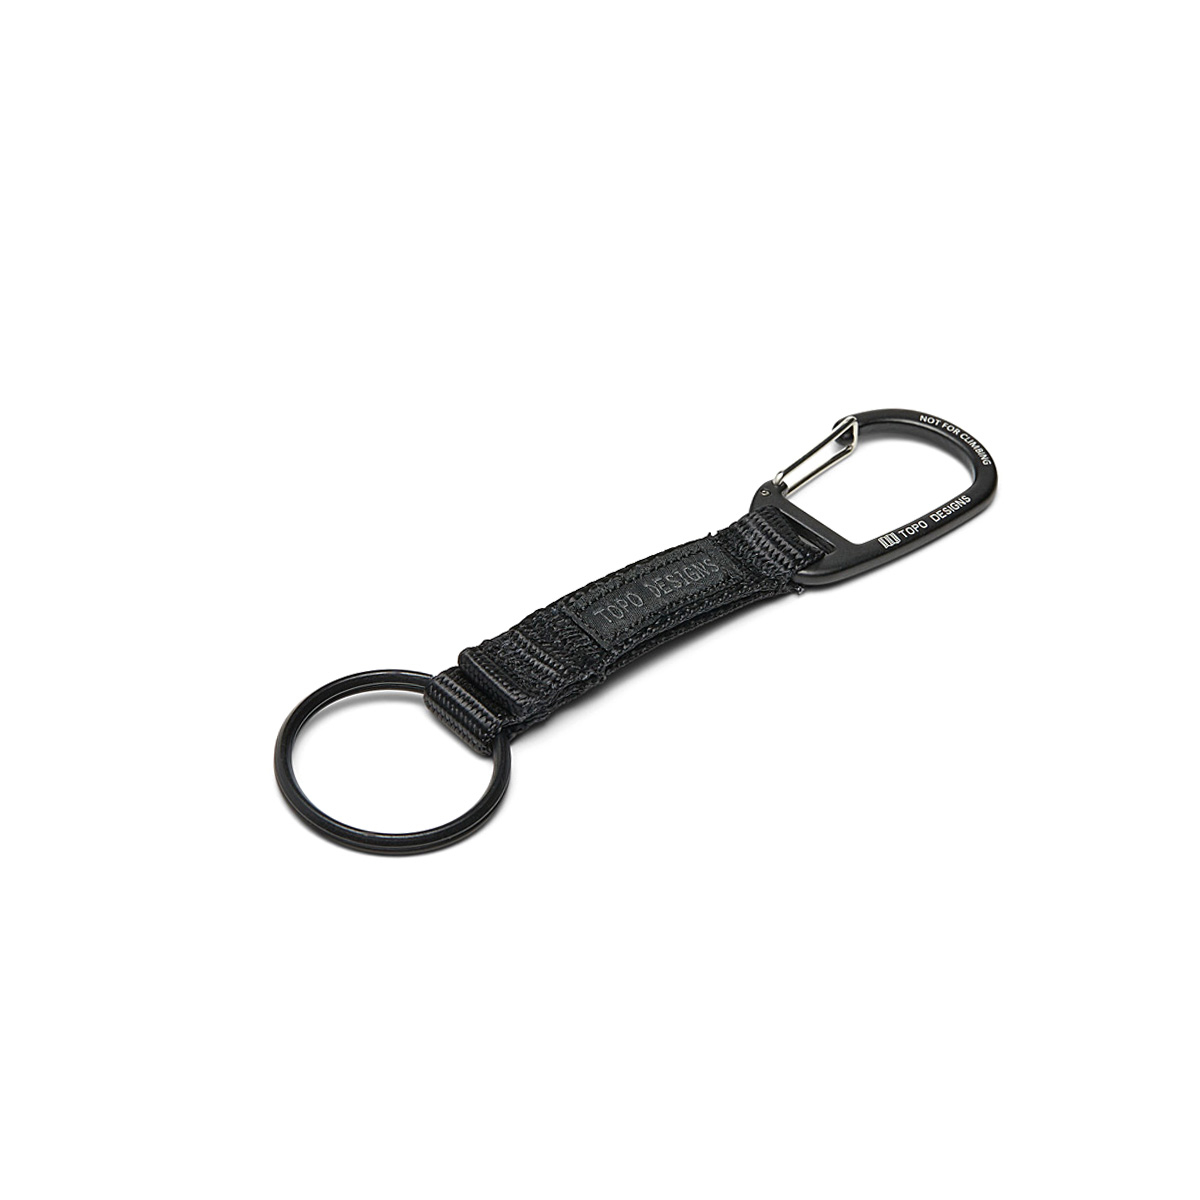 Topo Designs Key Clip Olive, keep keys handy and visible with the Key Clip